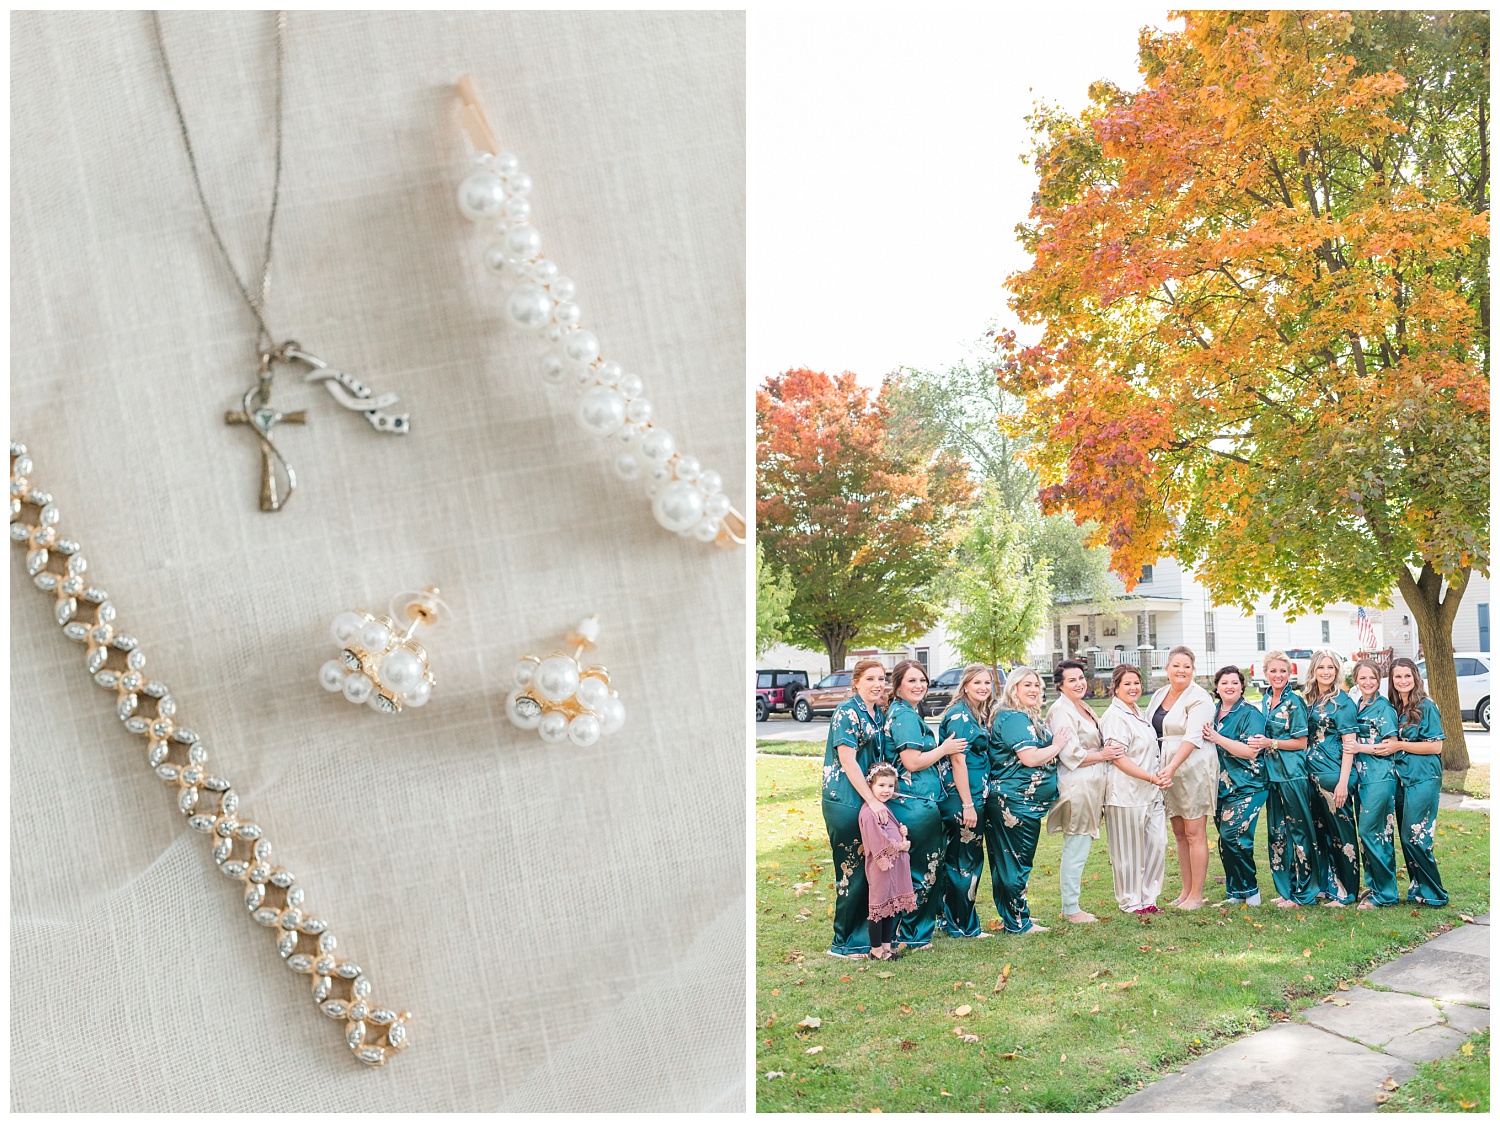 bride's details of earrings, bracelet, and necklace at Ohio wedding